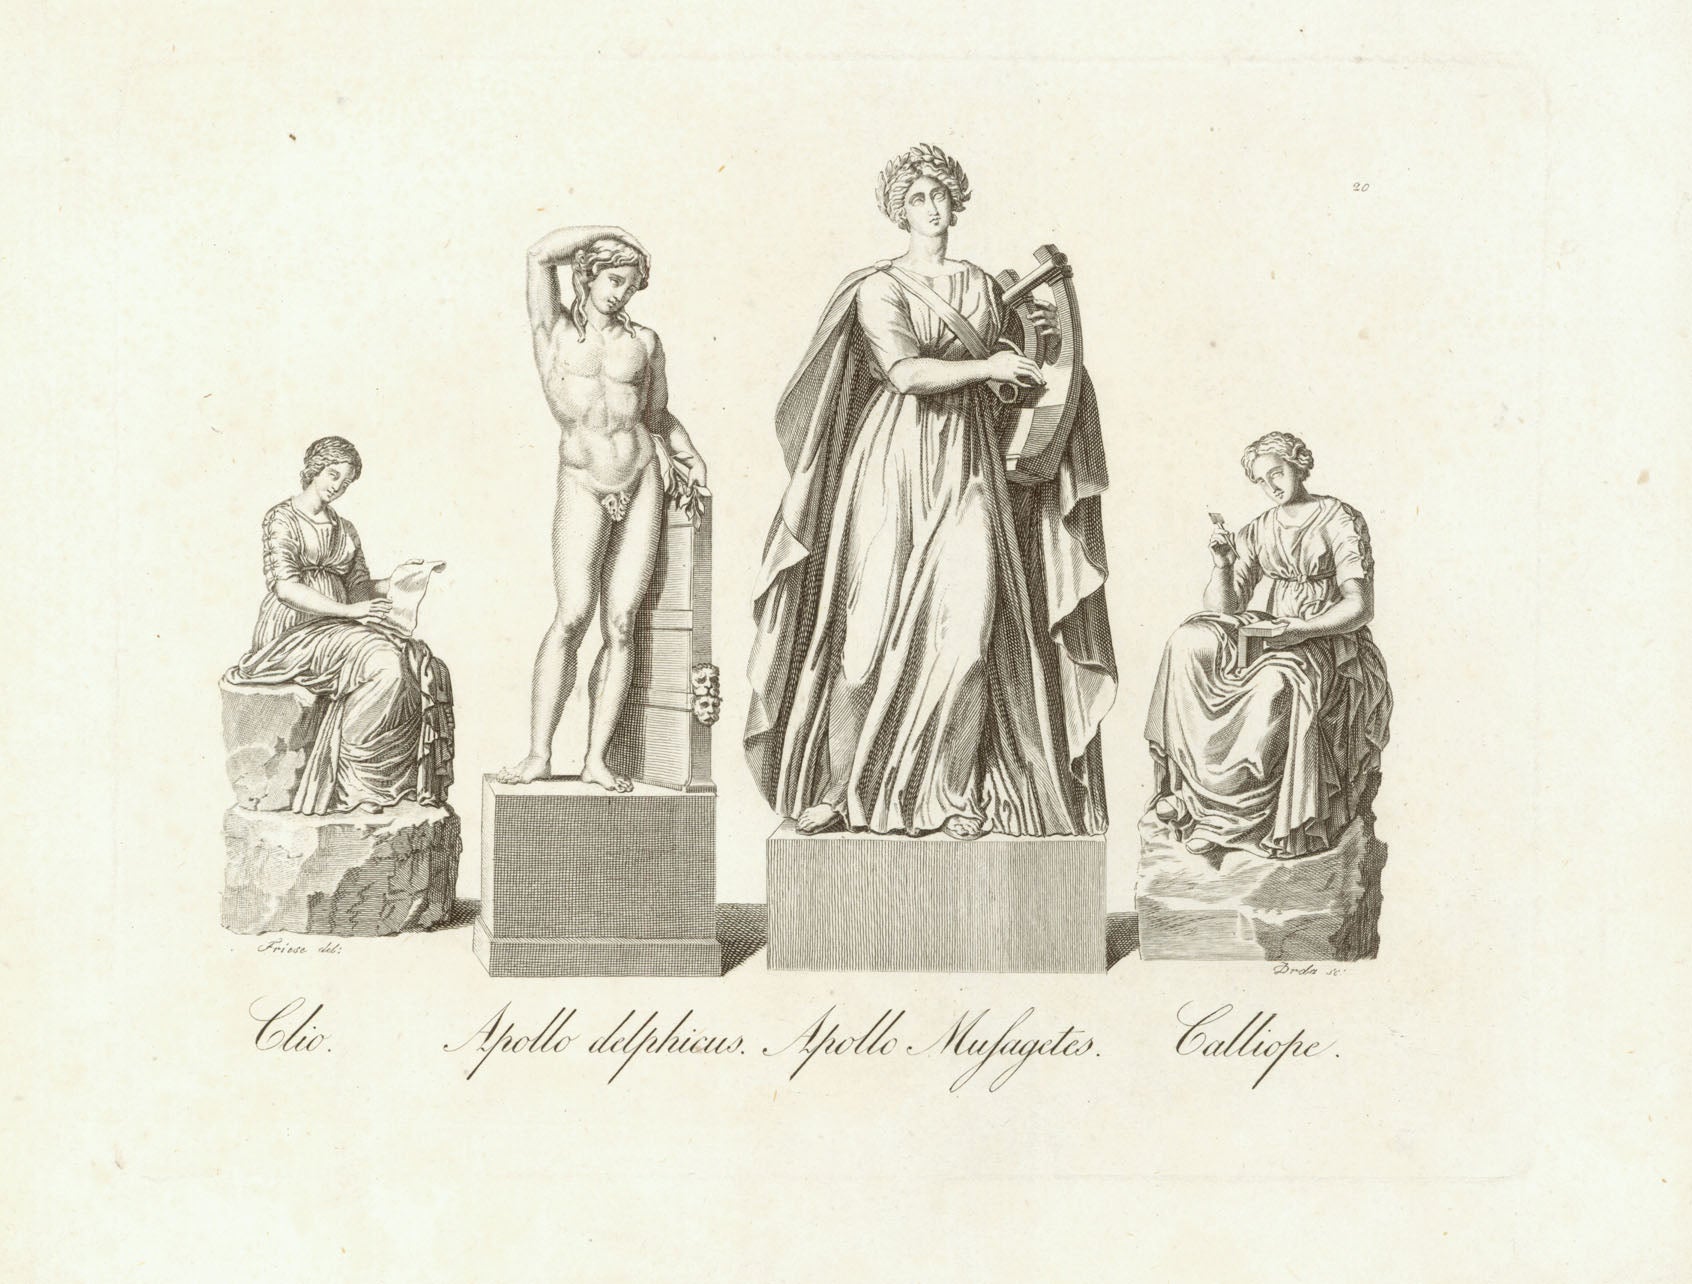 "Clio Apollo delphicus Apollo Musagetes Calliope"  Copper engraving after Leopold August Friese ( 1793-1842 ).  Published in Prague 1822. Very minor signs of age and use.  Page size: 25 x 31.5 cm ( 9.8 x 12.4 ")